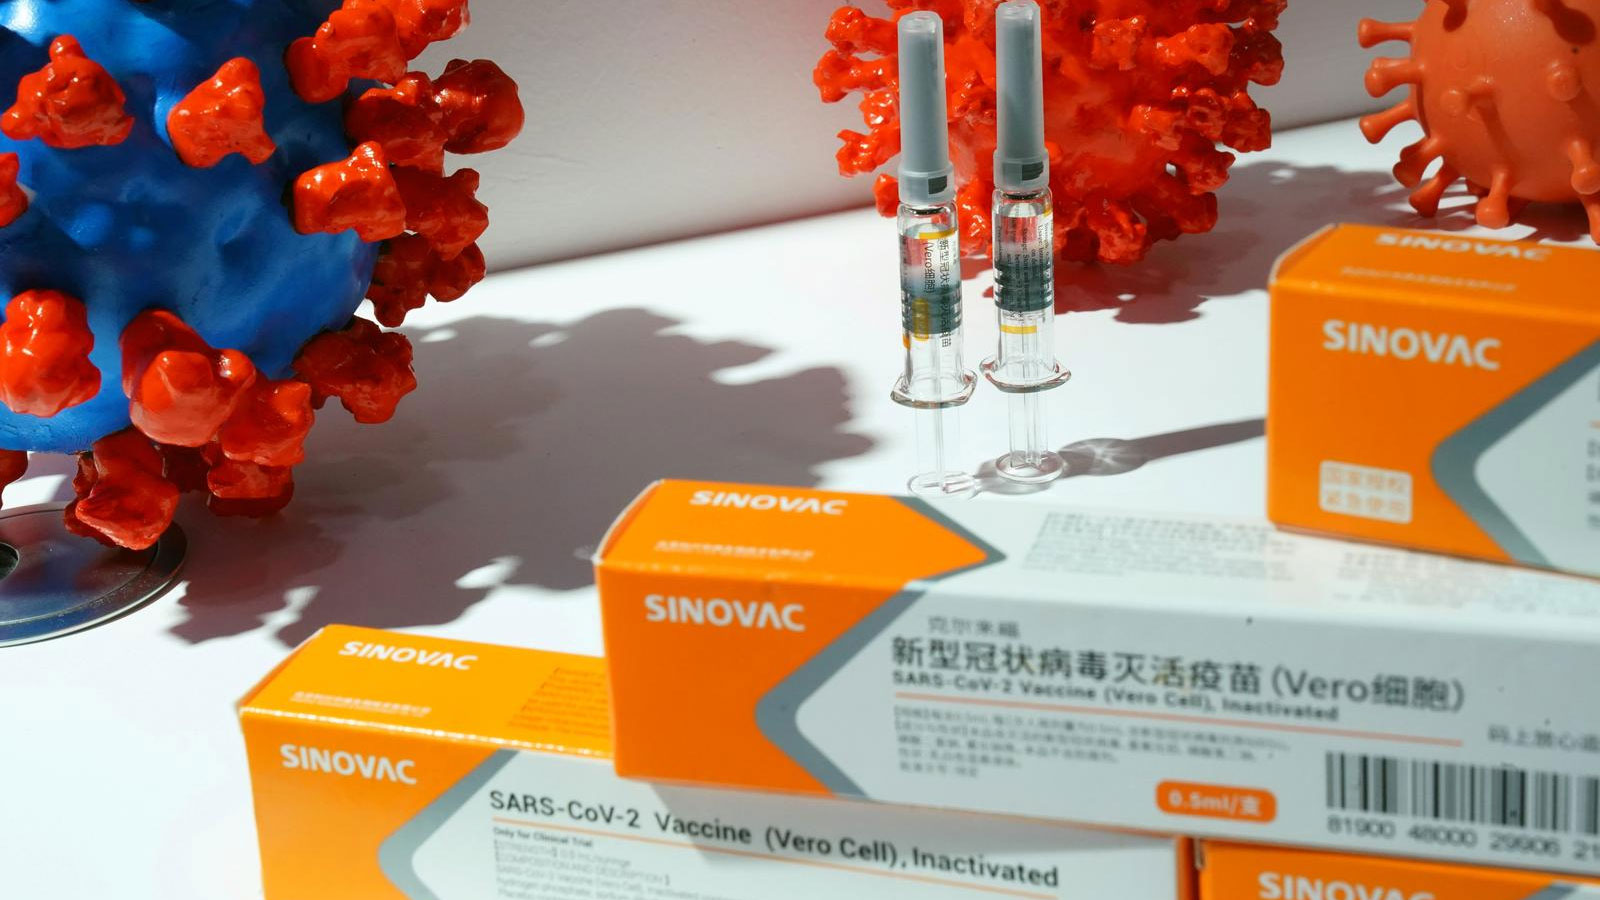 Turkey begins Phase III trials of Chinese COVID19 vaccine ...